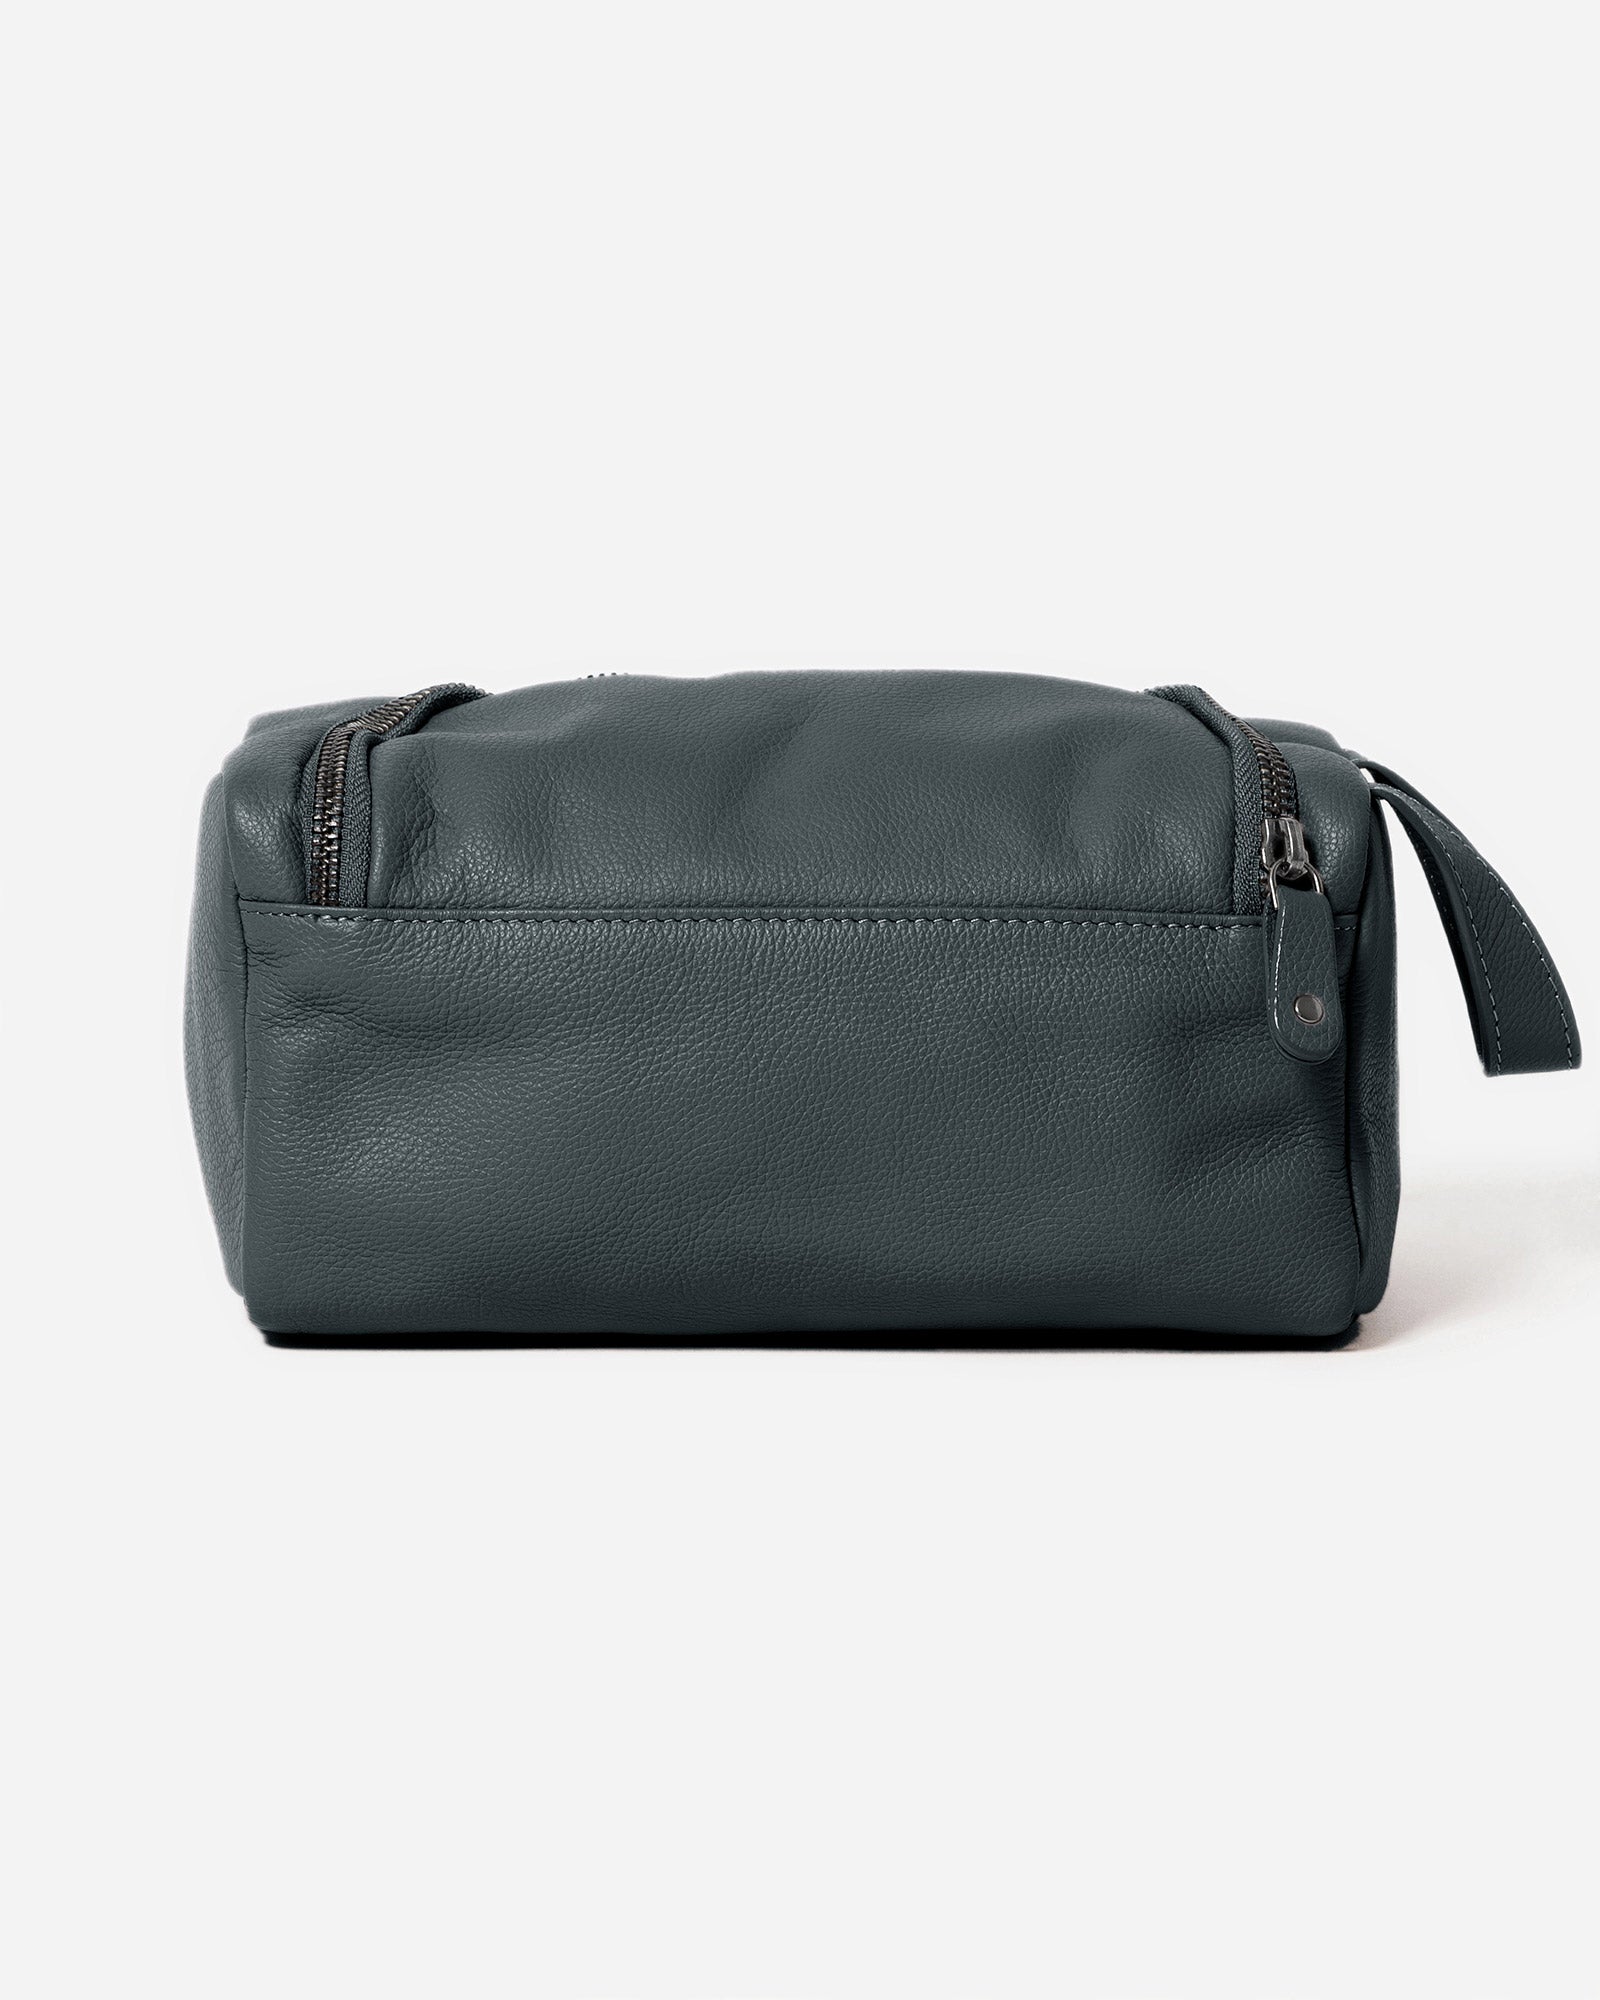 Jett Toiletry Bag - Unisex Leather Travel Toiletry Bag – Stitch & Hide